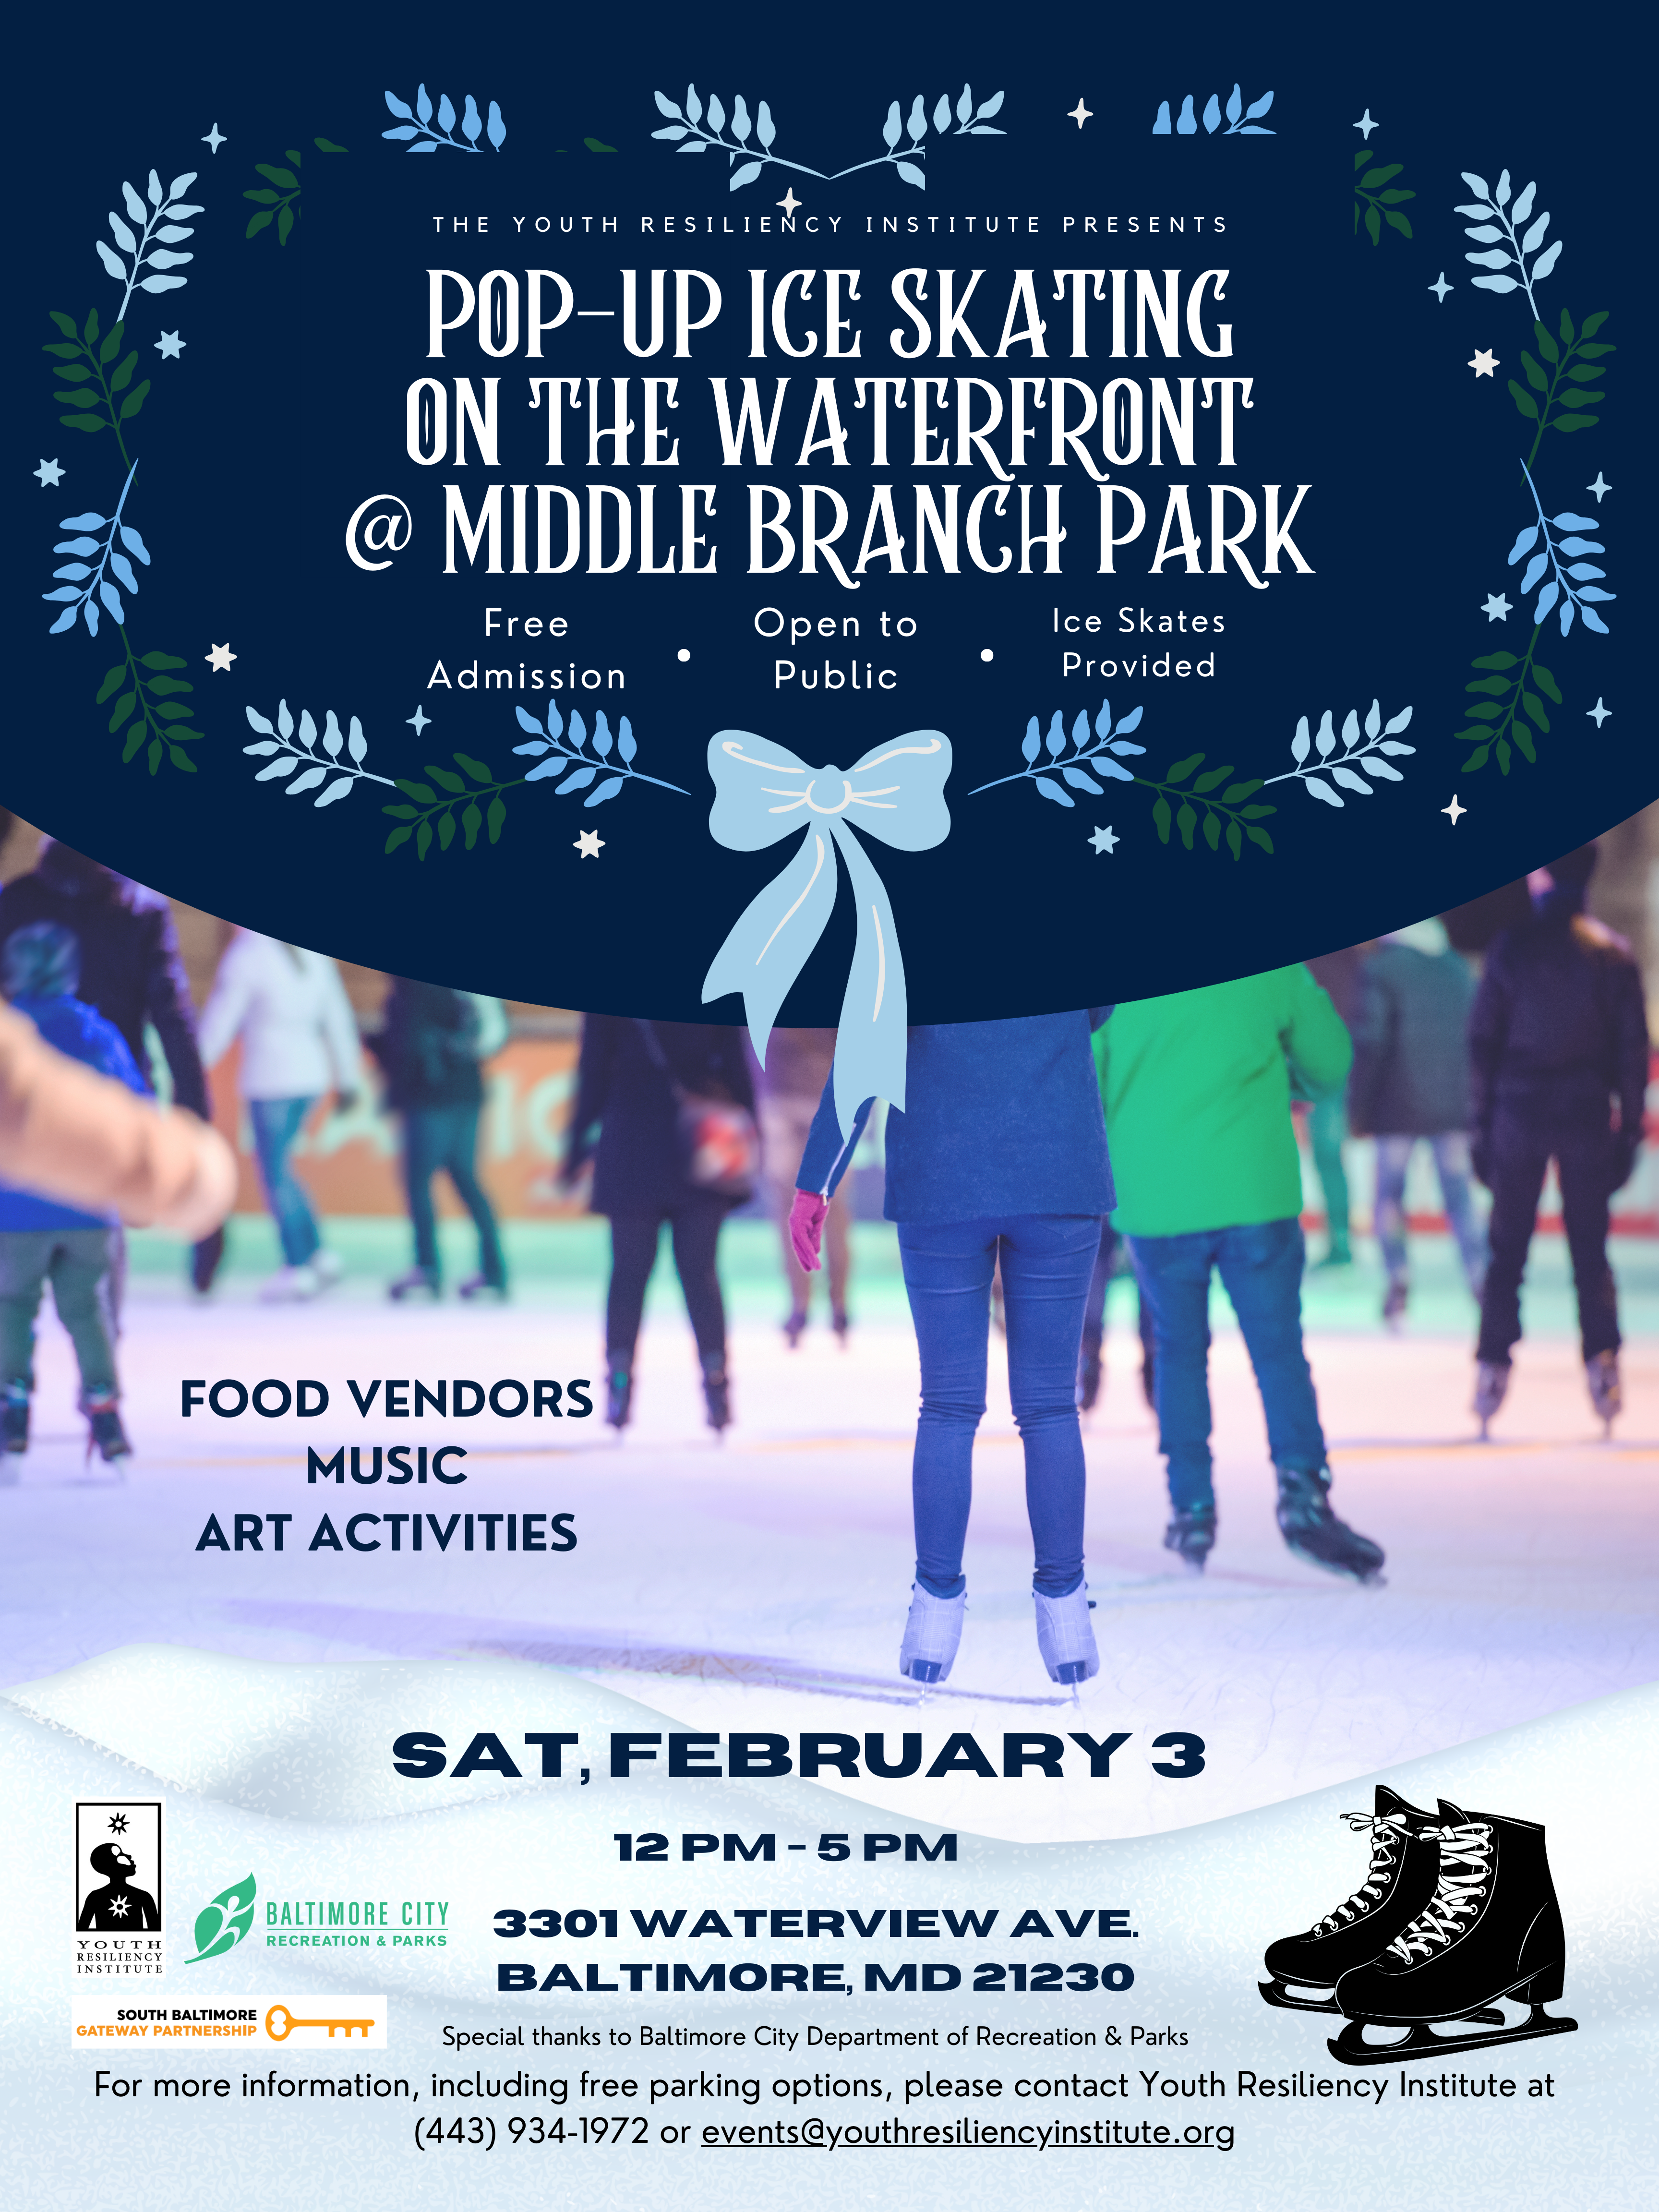 Flyer with dark blue background and white text containing event info above a photo of people ice-skating.